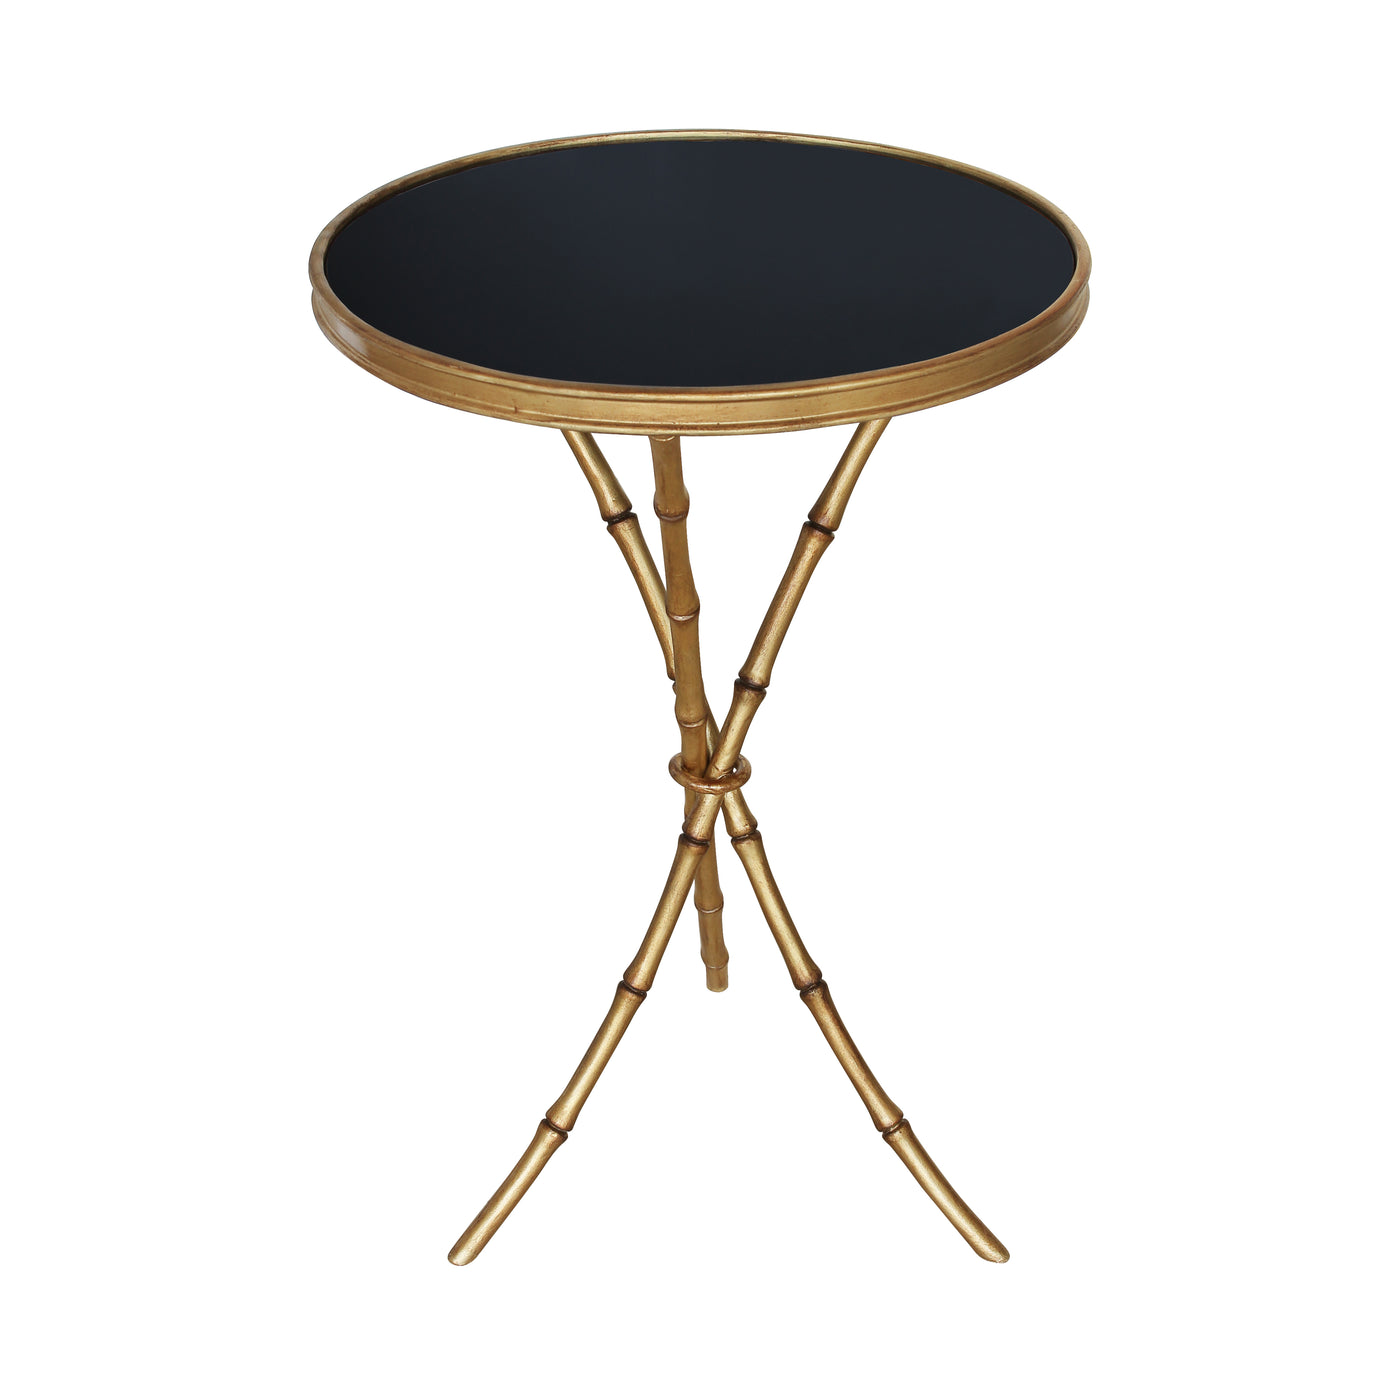 Accent table with golden bamboo legs and back painted glass top